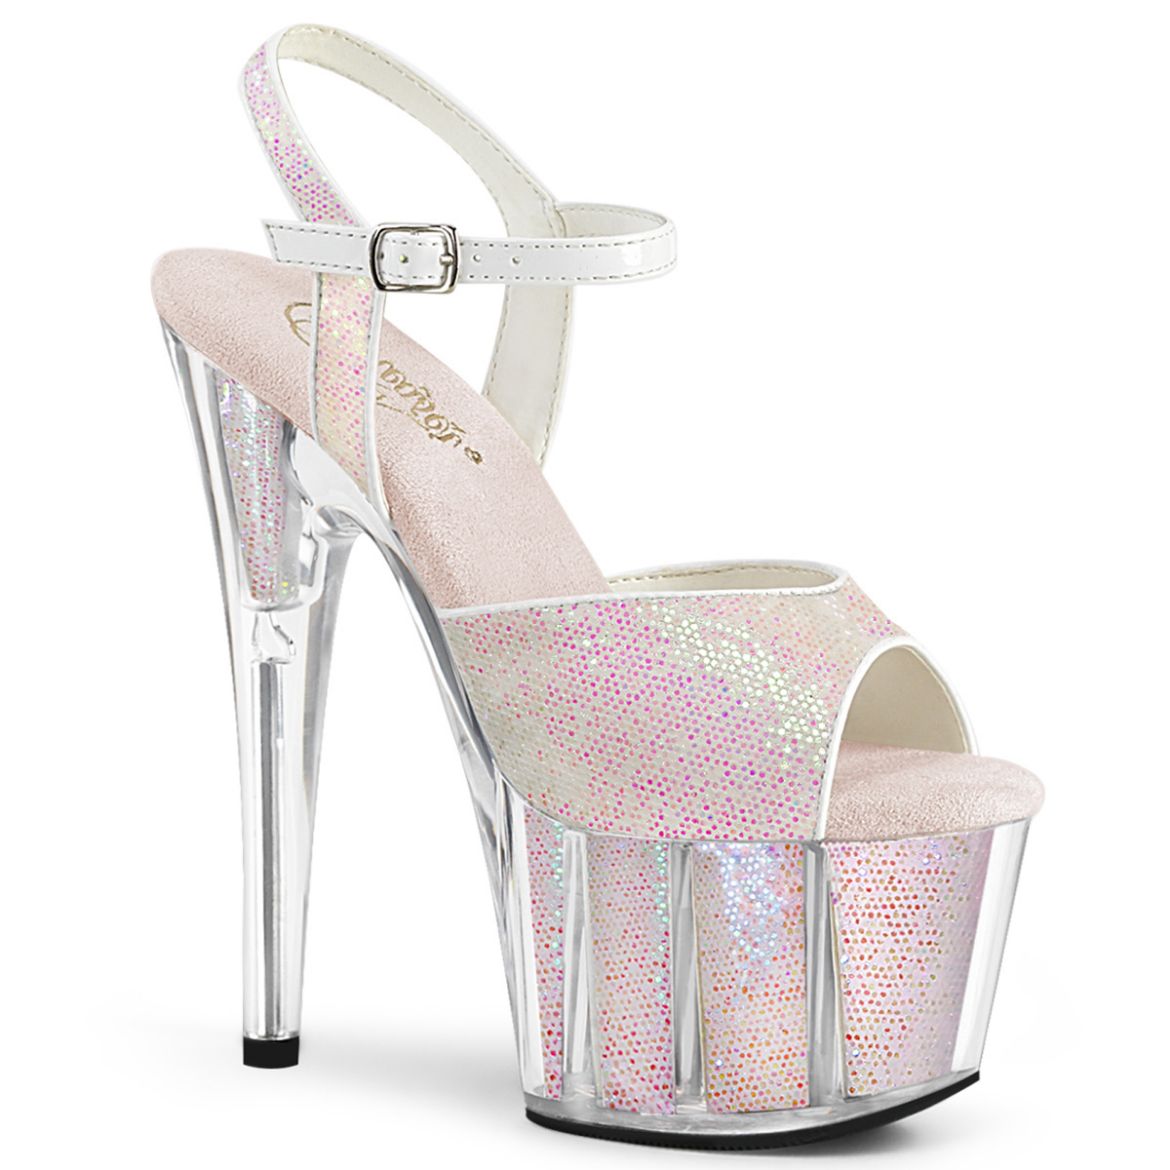 Product image of Pleaser ADORE-710G Multicolour Glitter/Multicolour Glitter Inserts 7 inch (17.8 cm) Heel 2 3/4 inch (7 cm) Platform Ankle Strap Sandal With Glitter Inserts